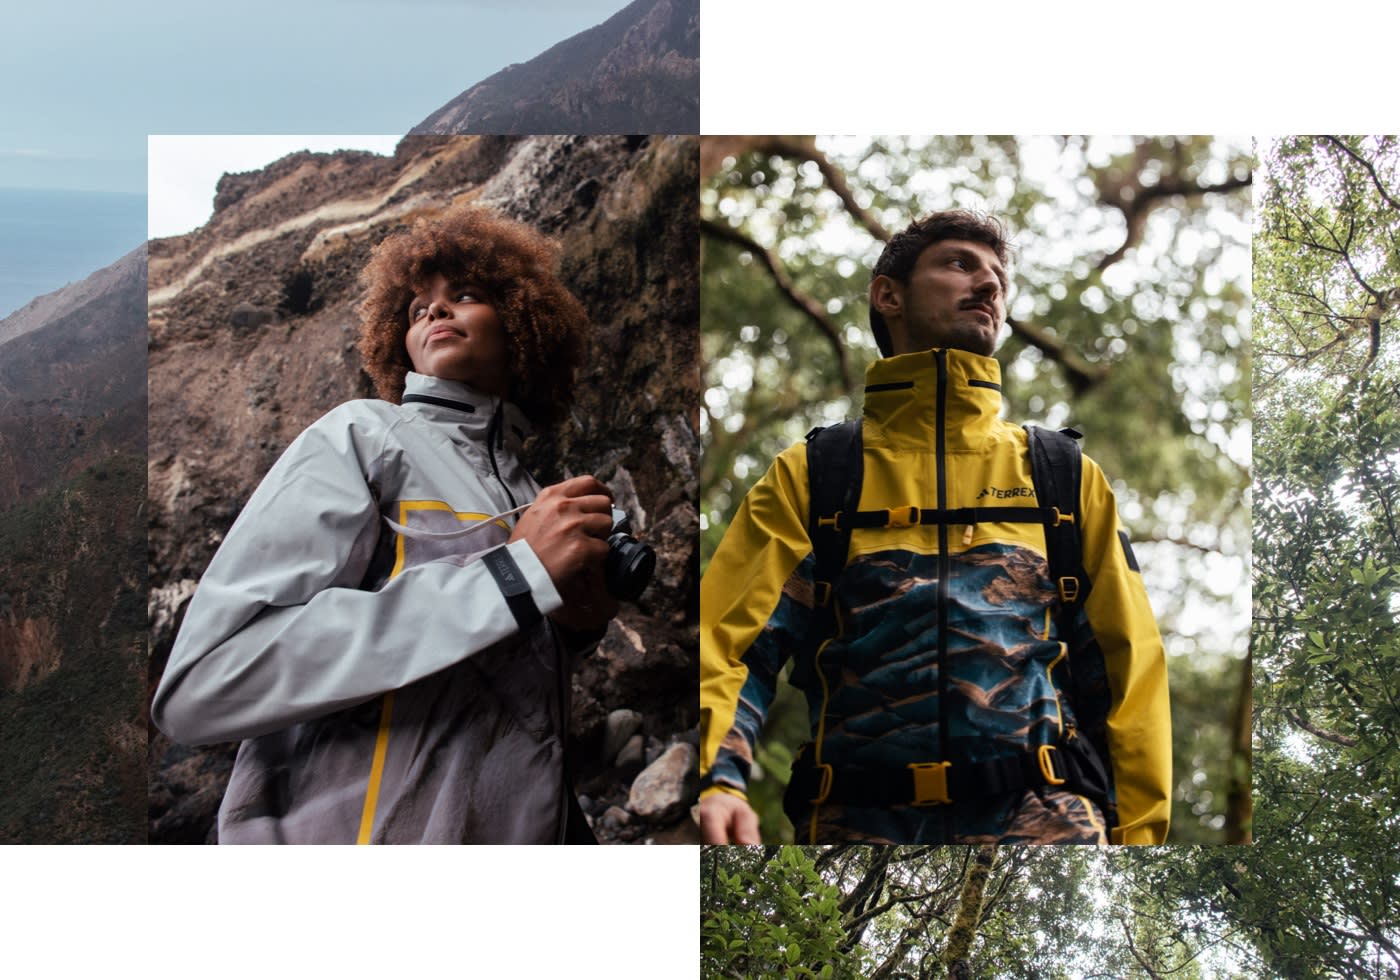 A woman and a man in nature wearing the adidas TERREX x © National Geographic collab jackets